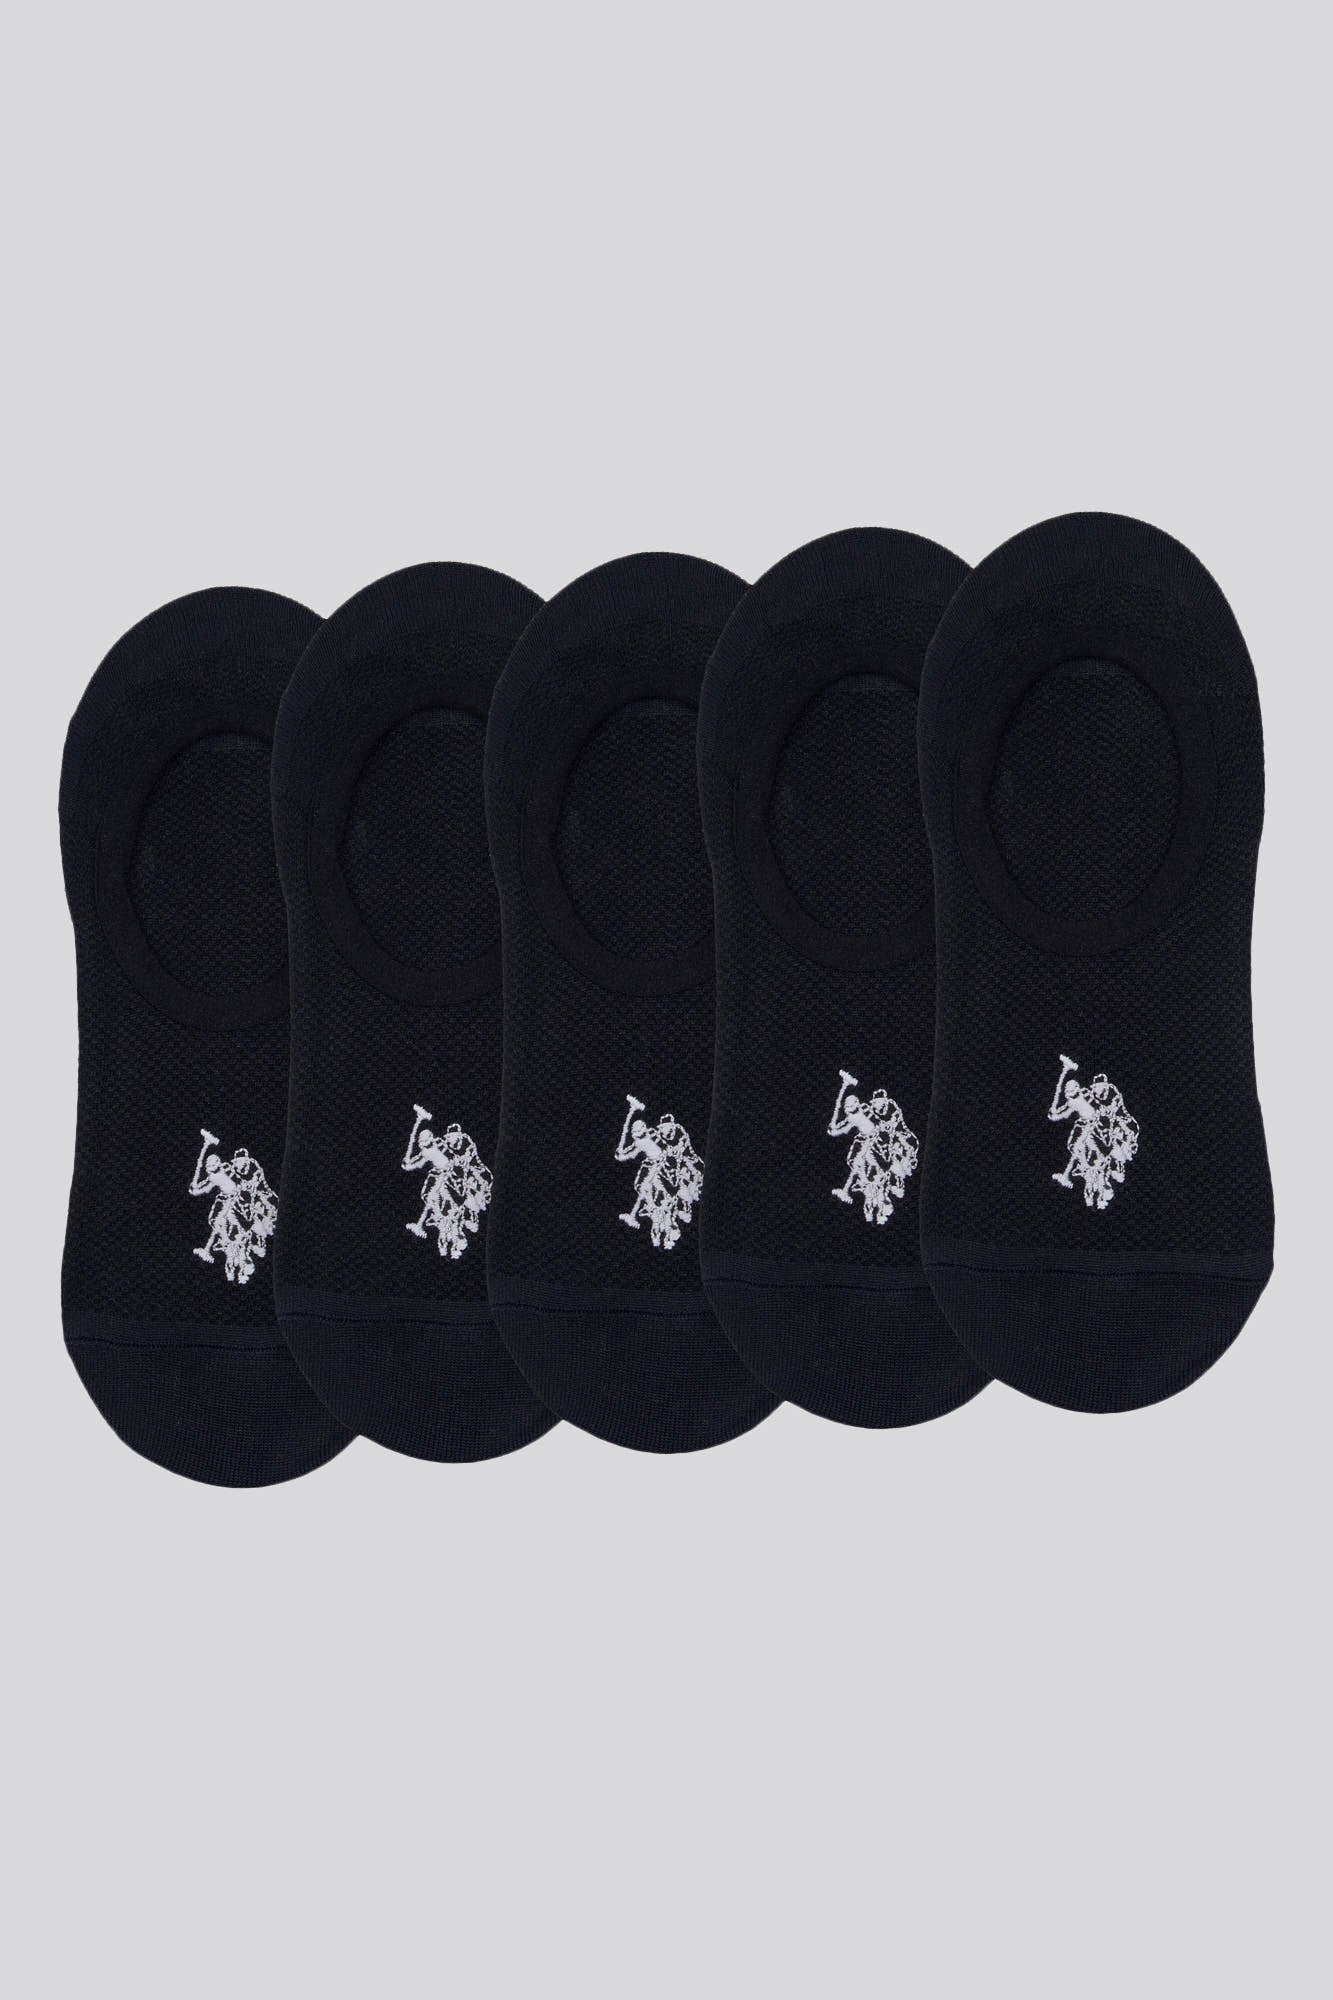 5 Pack Invisible Trainer Socks in Black